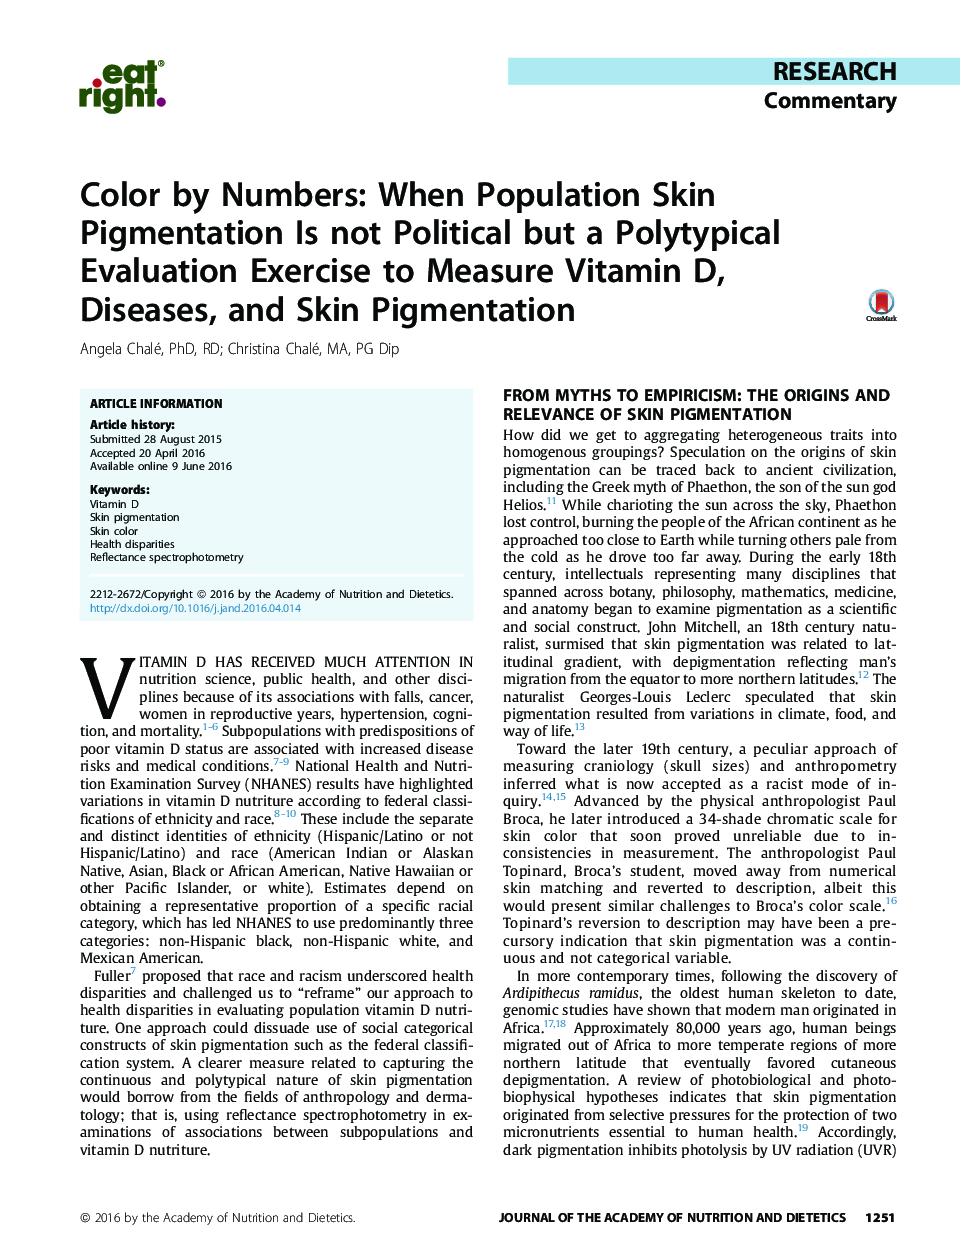 Color by Numbers: When Population Skin Pigmentation Is not Political but a Polytypical Evaluation Exercise to Measure Vitamin D, Diseases, and Skin Pigmentation